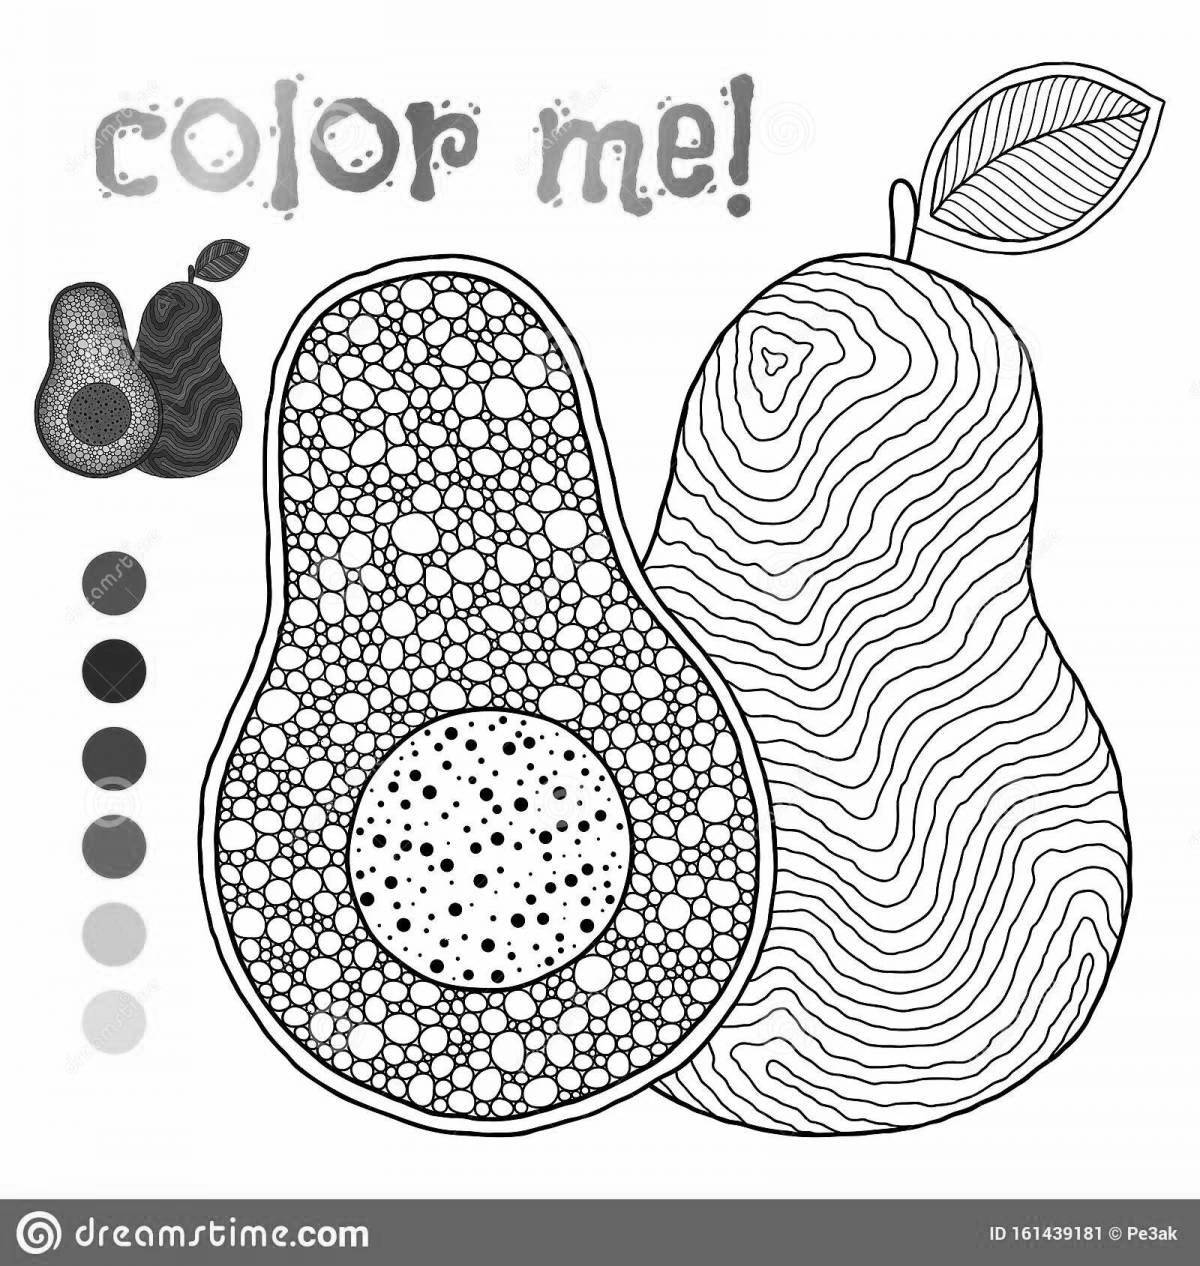 Amazing avocado coloring pages for 6-7 year olds